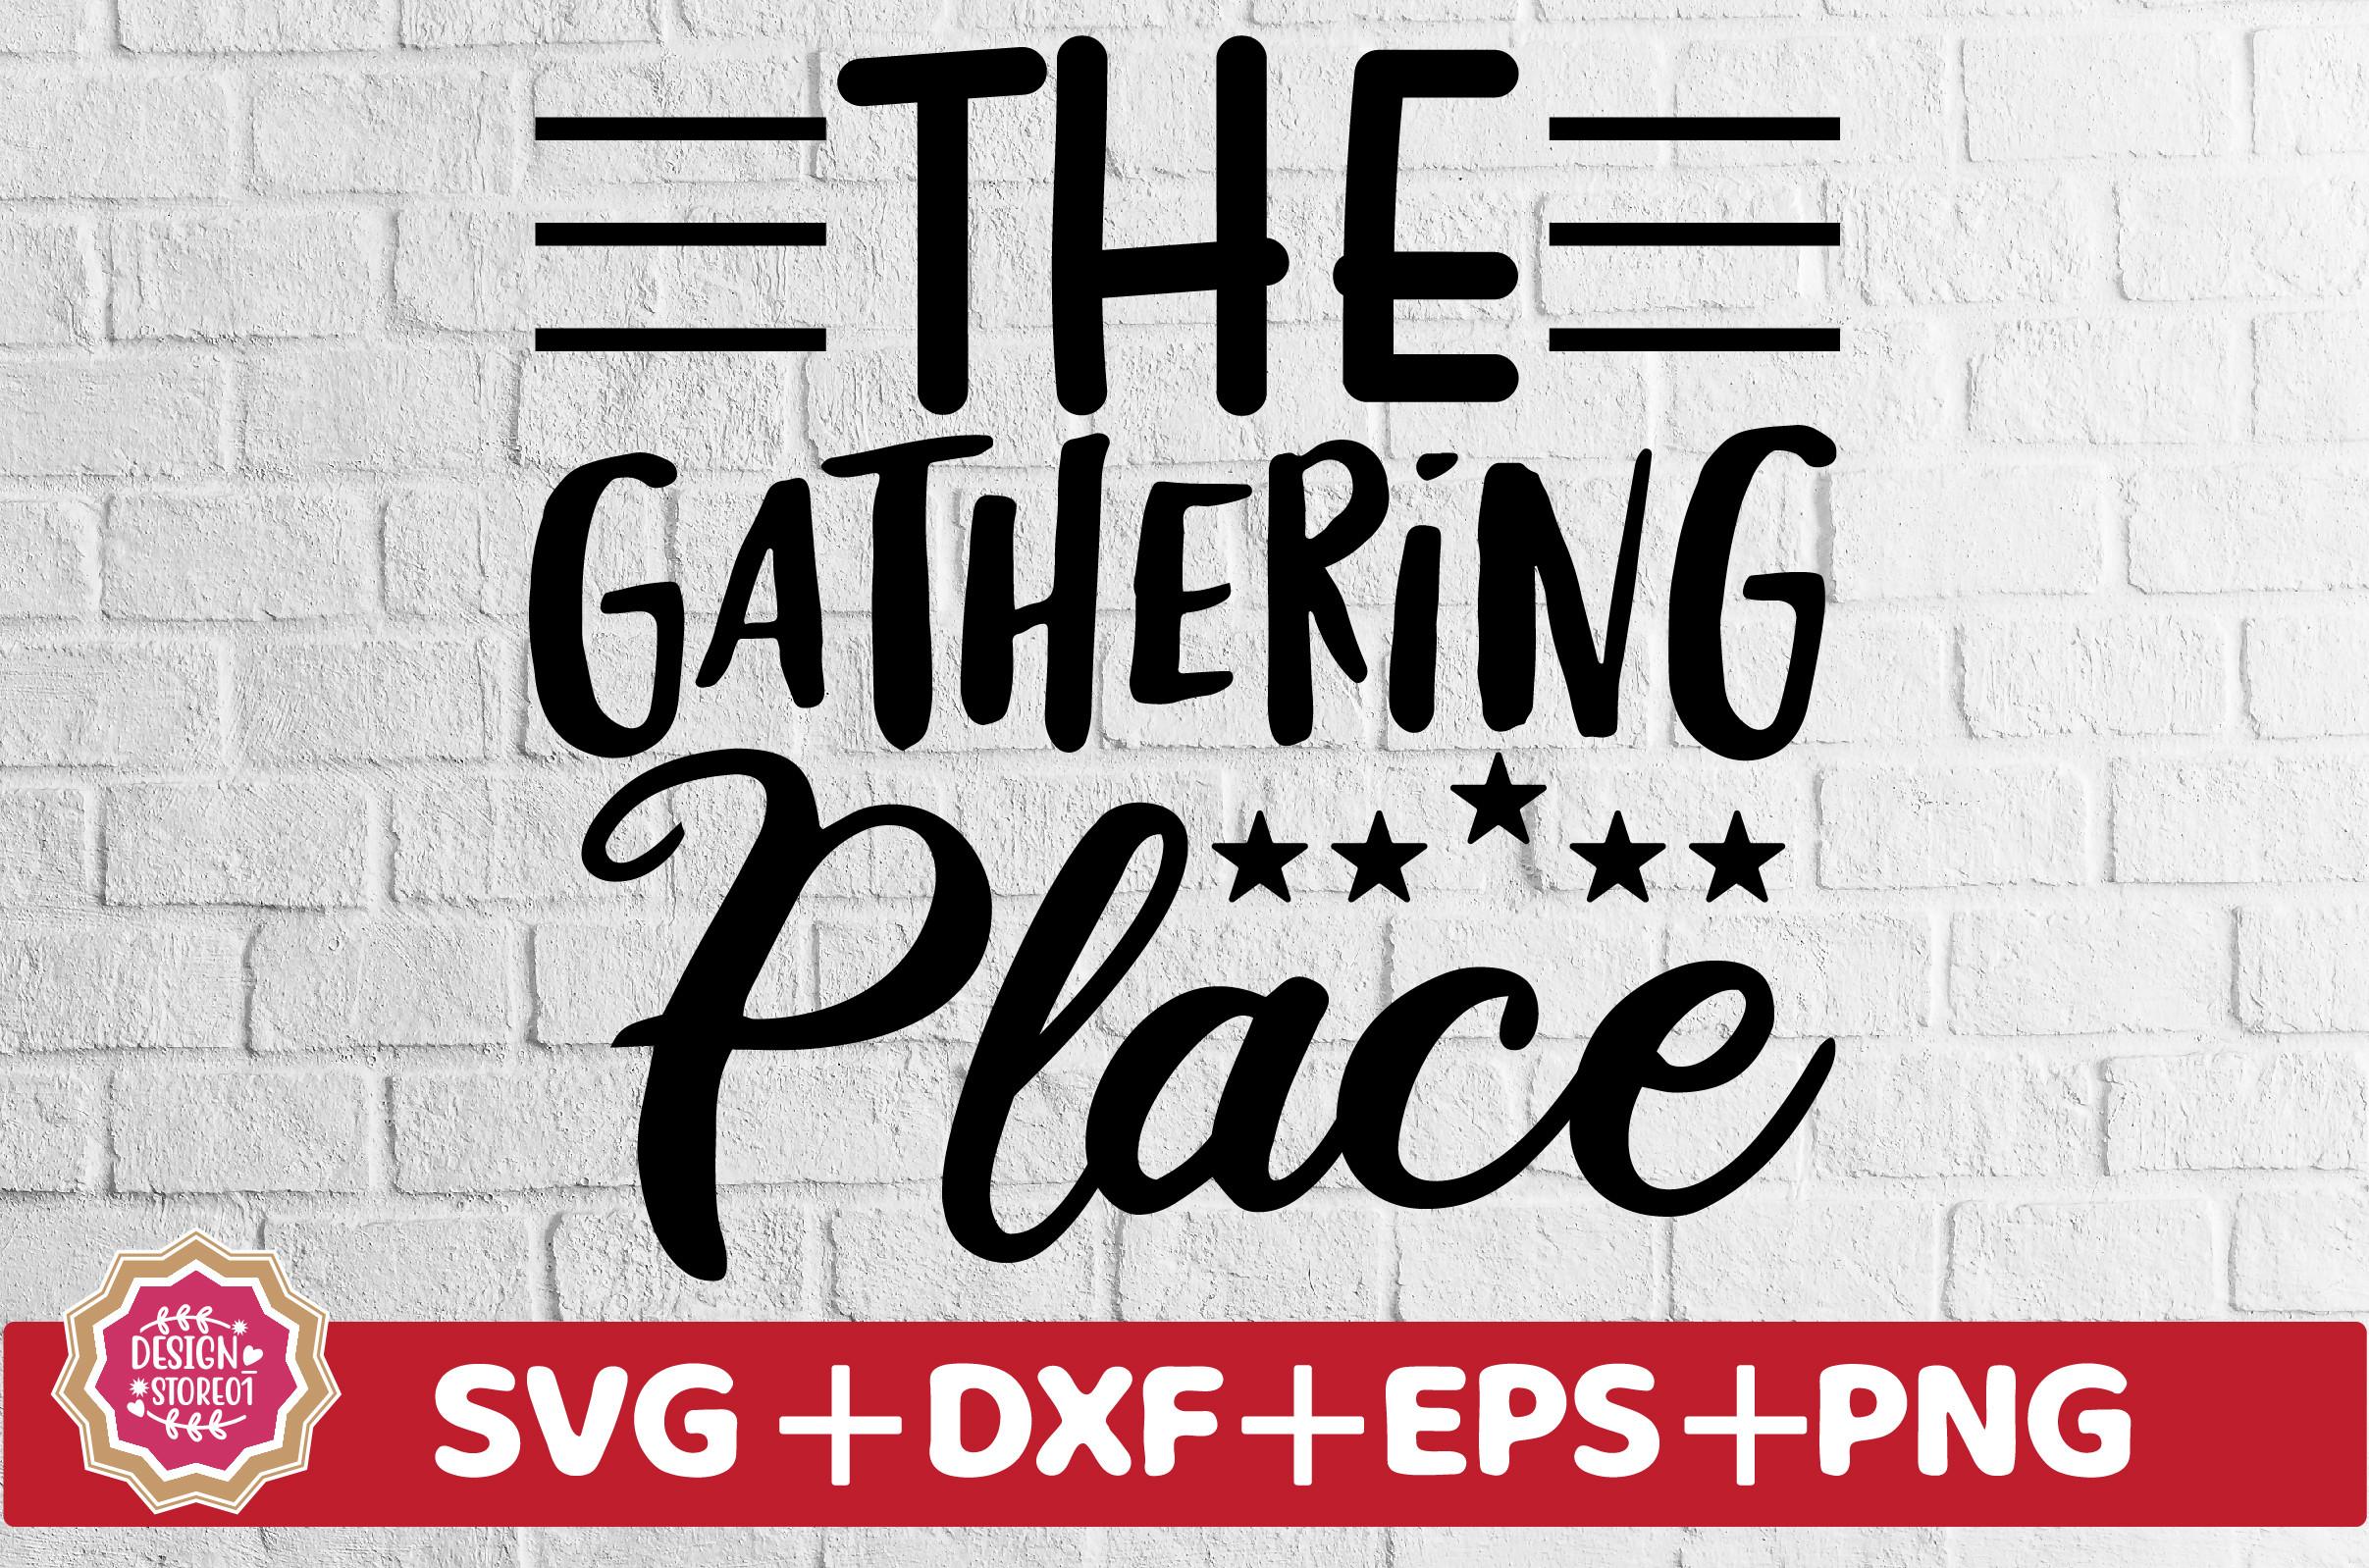 The Gathering Place SVG